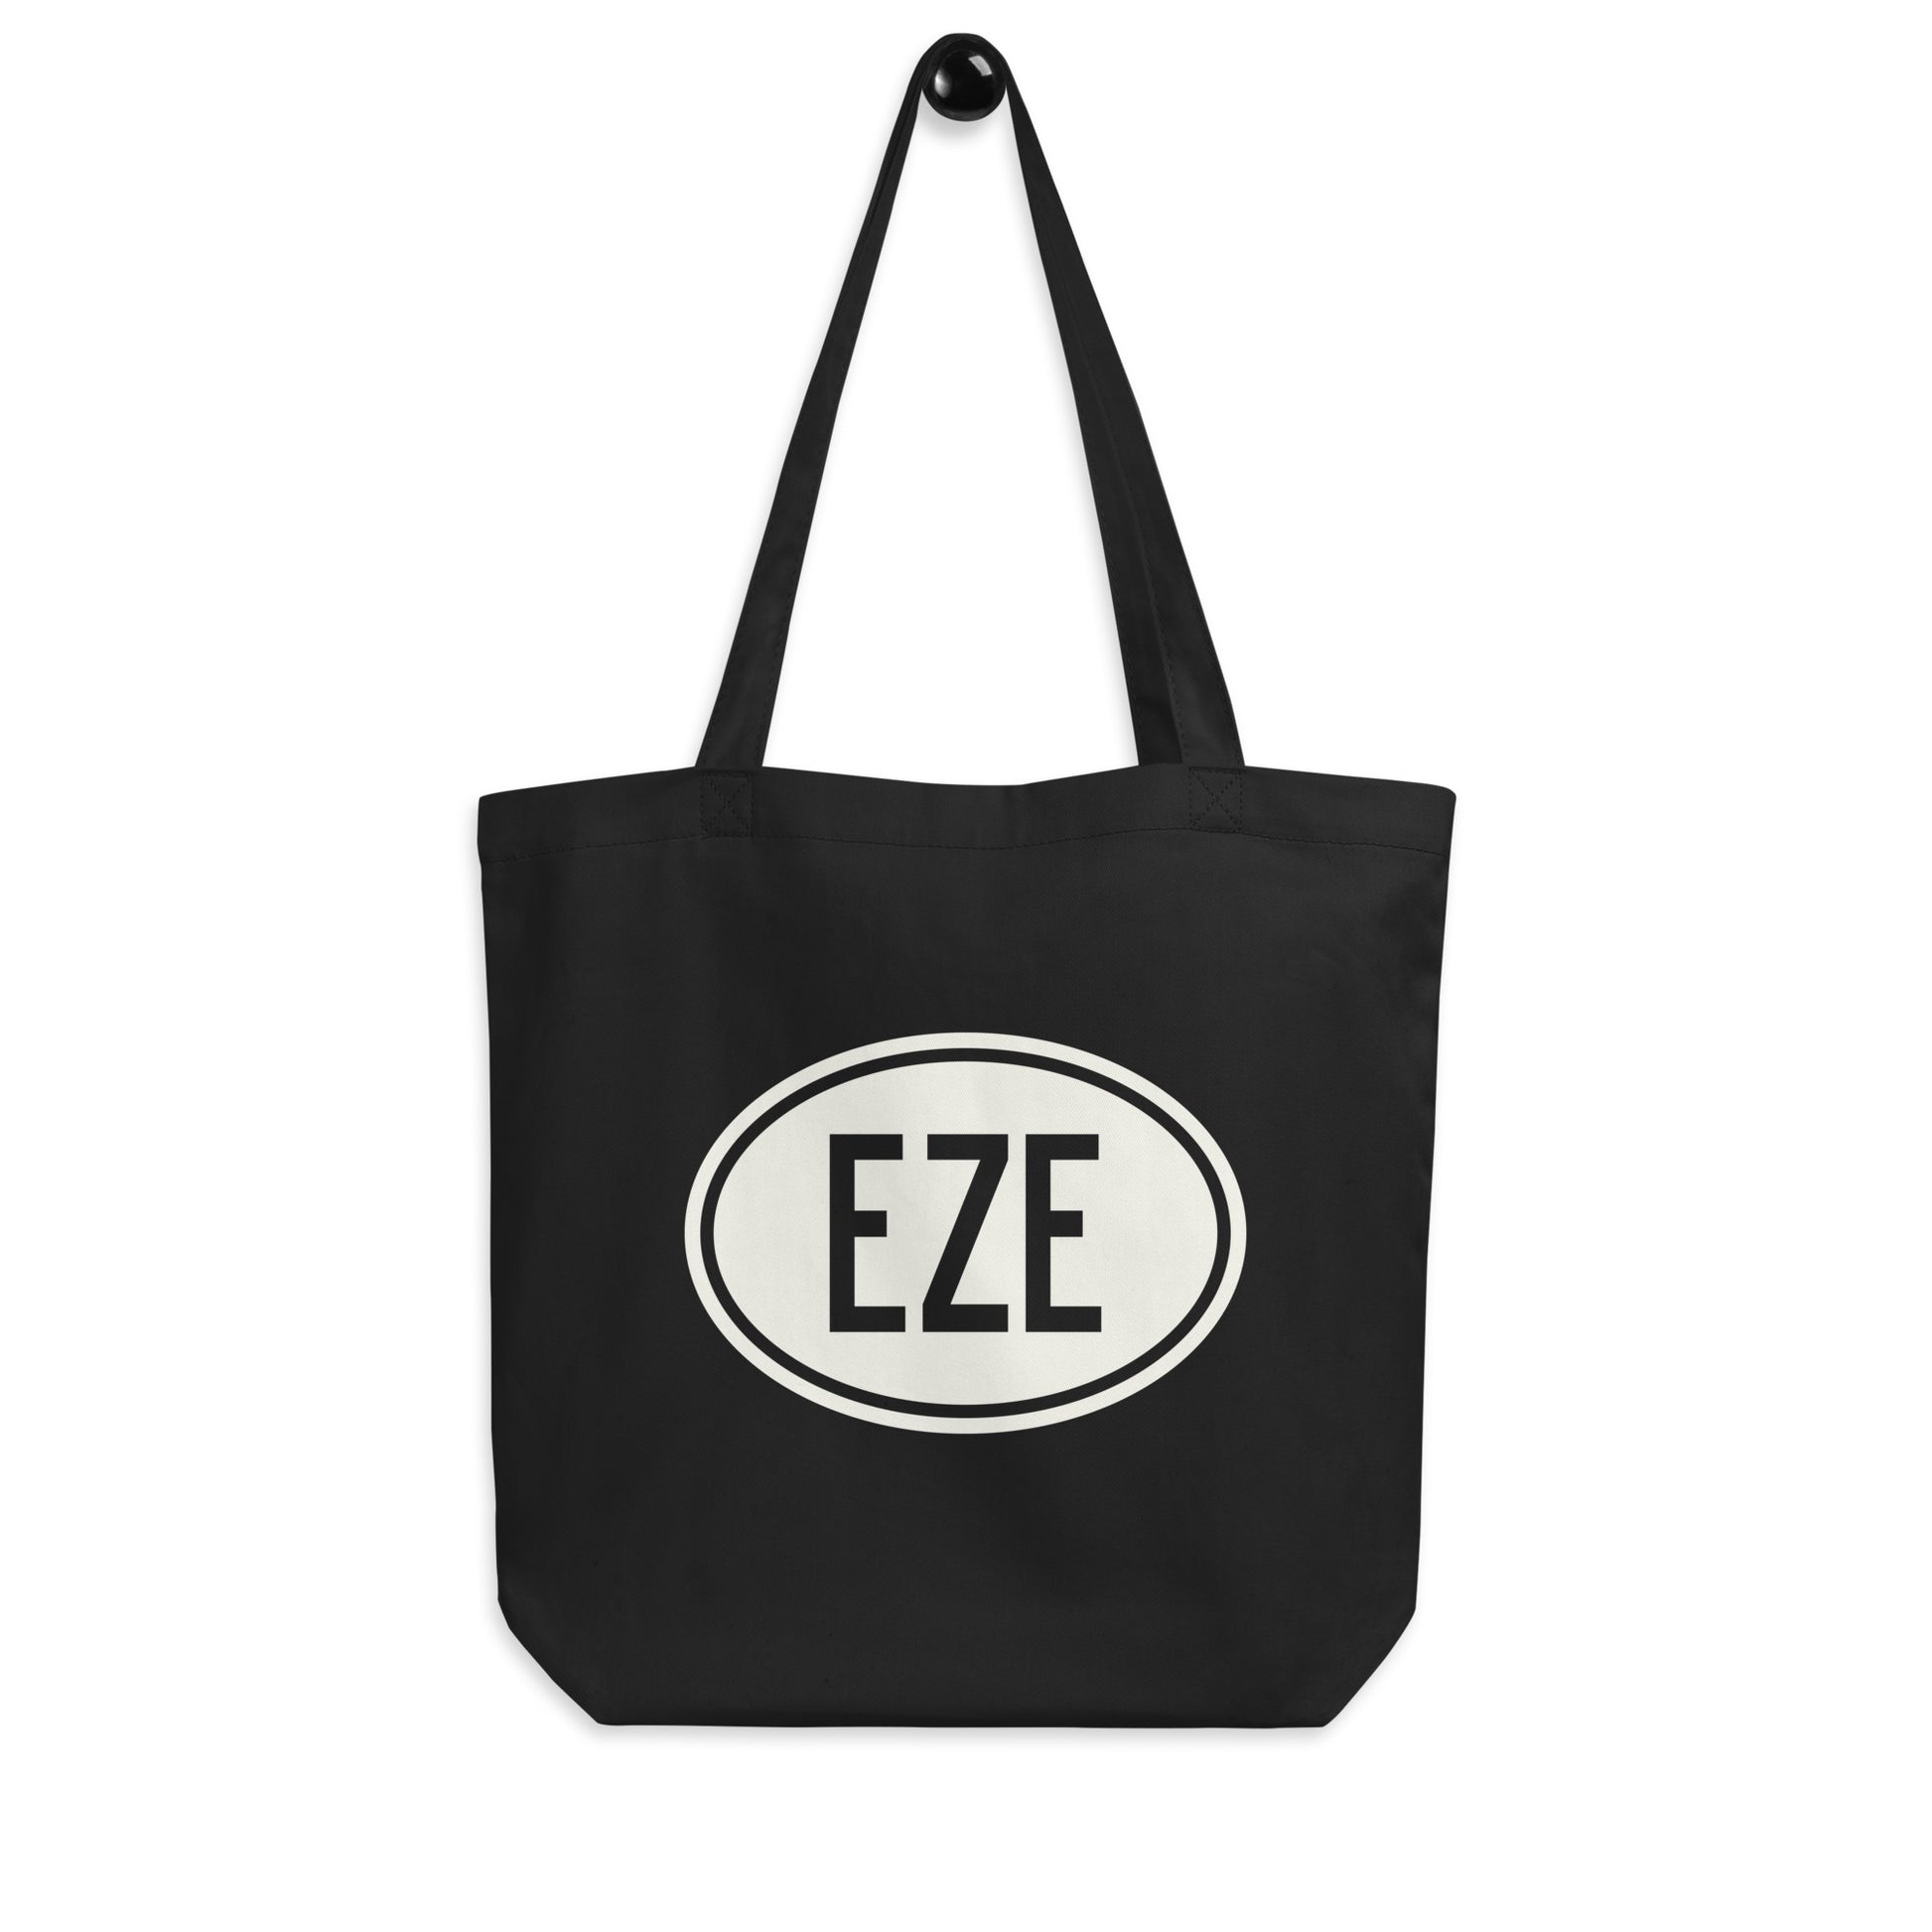 Unique Travel Gift Organic Tote - White Oval • EZE Buenos Aires • YHM Designs - Image 04